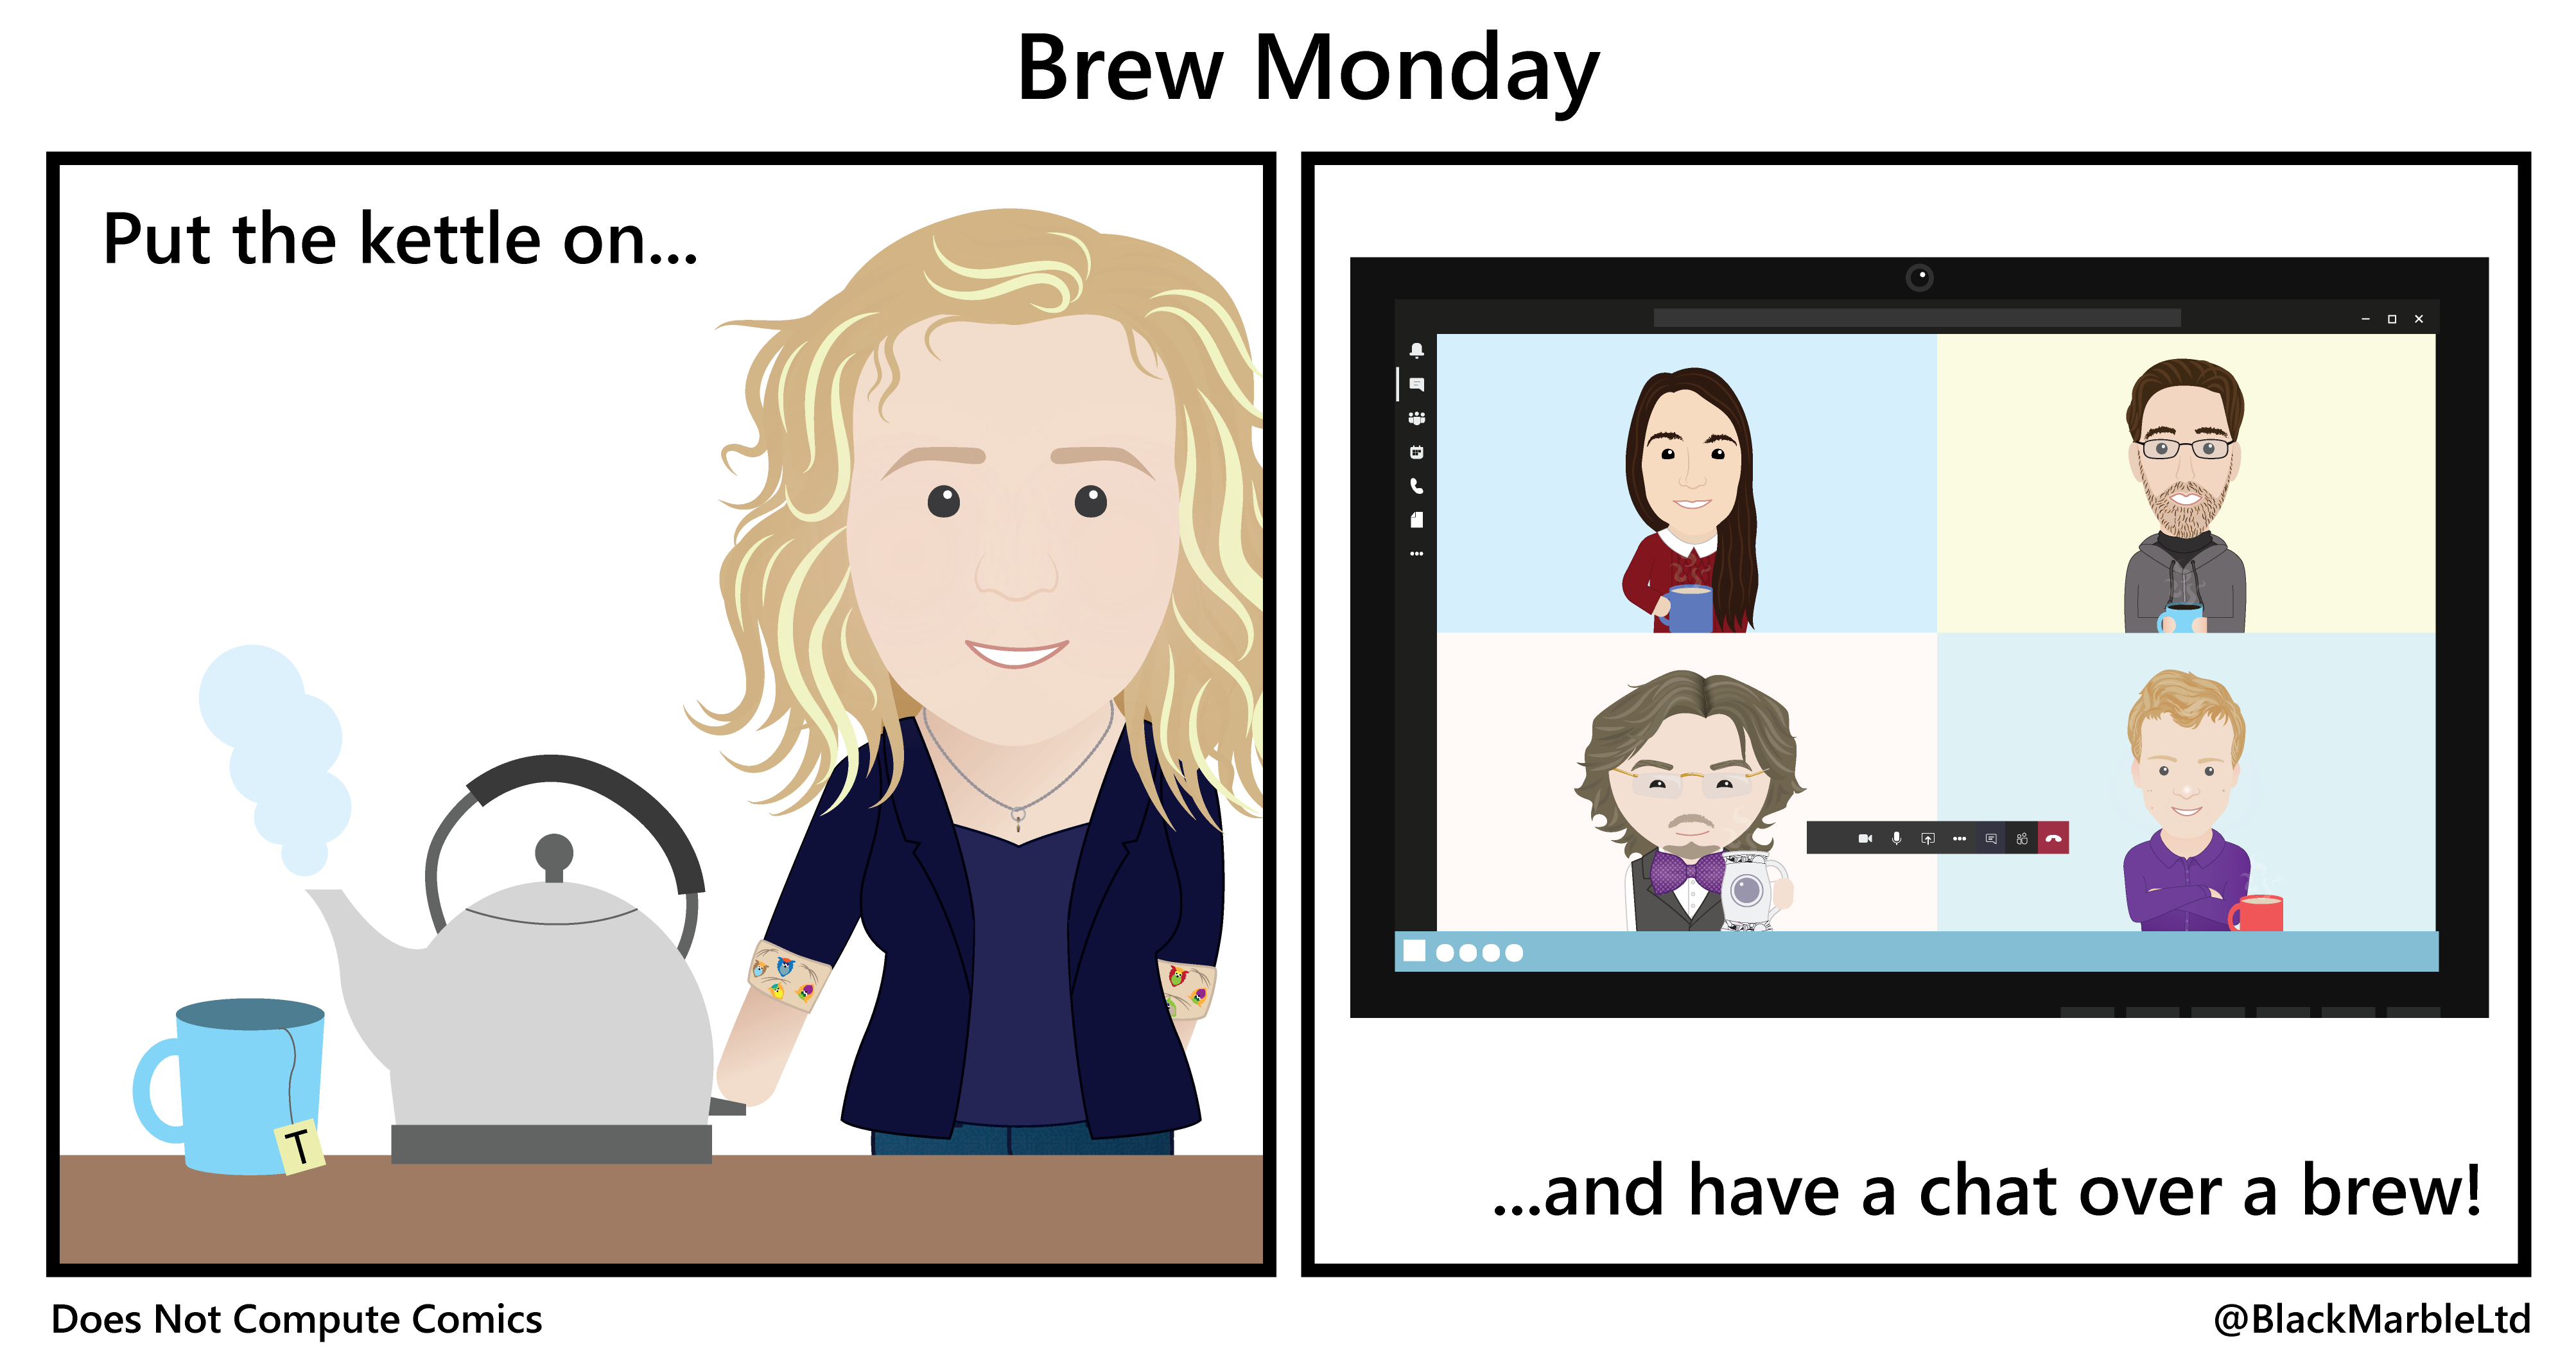 Put the kettle on for Brew Monday with your team.